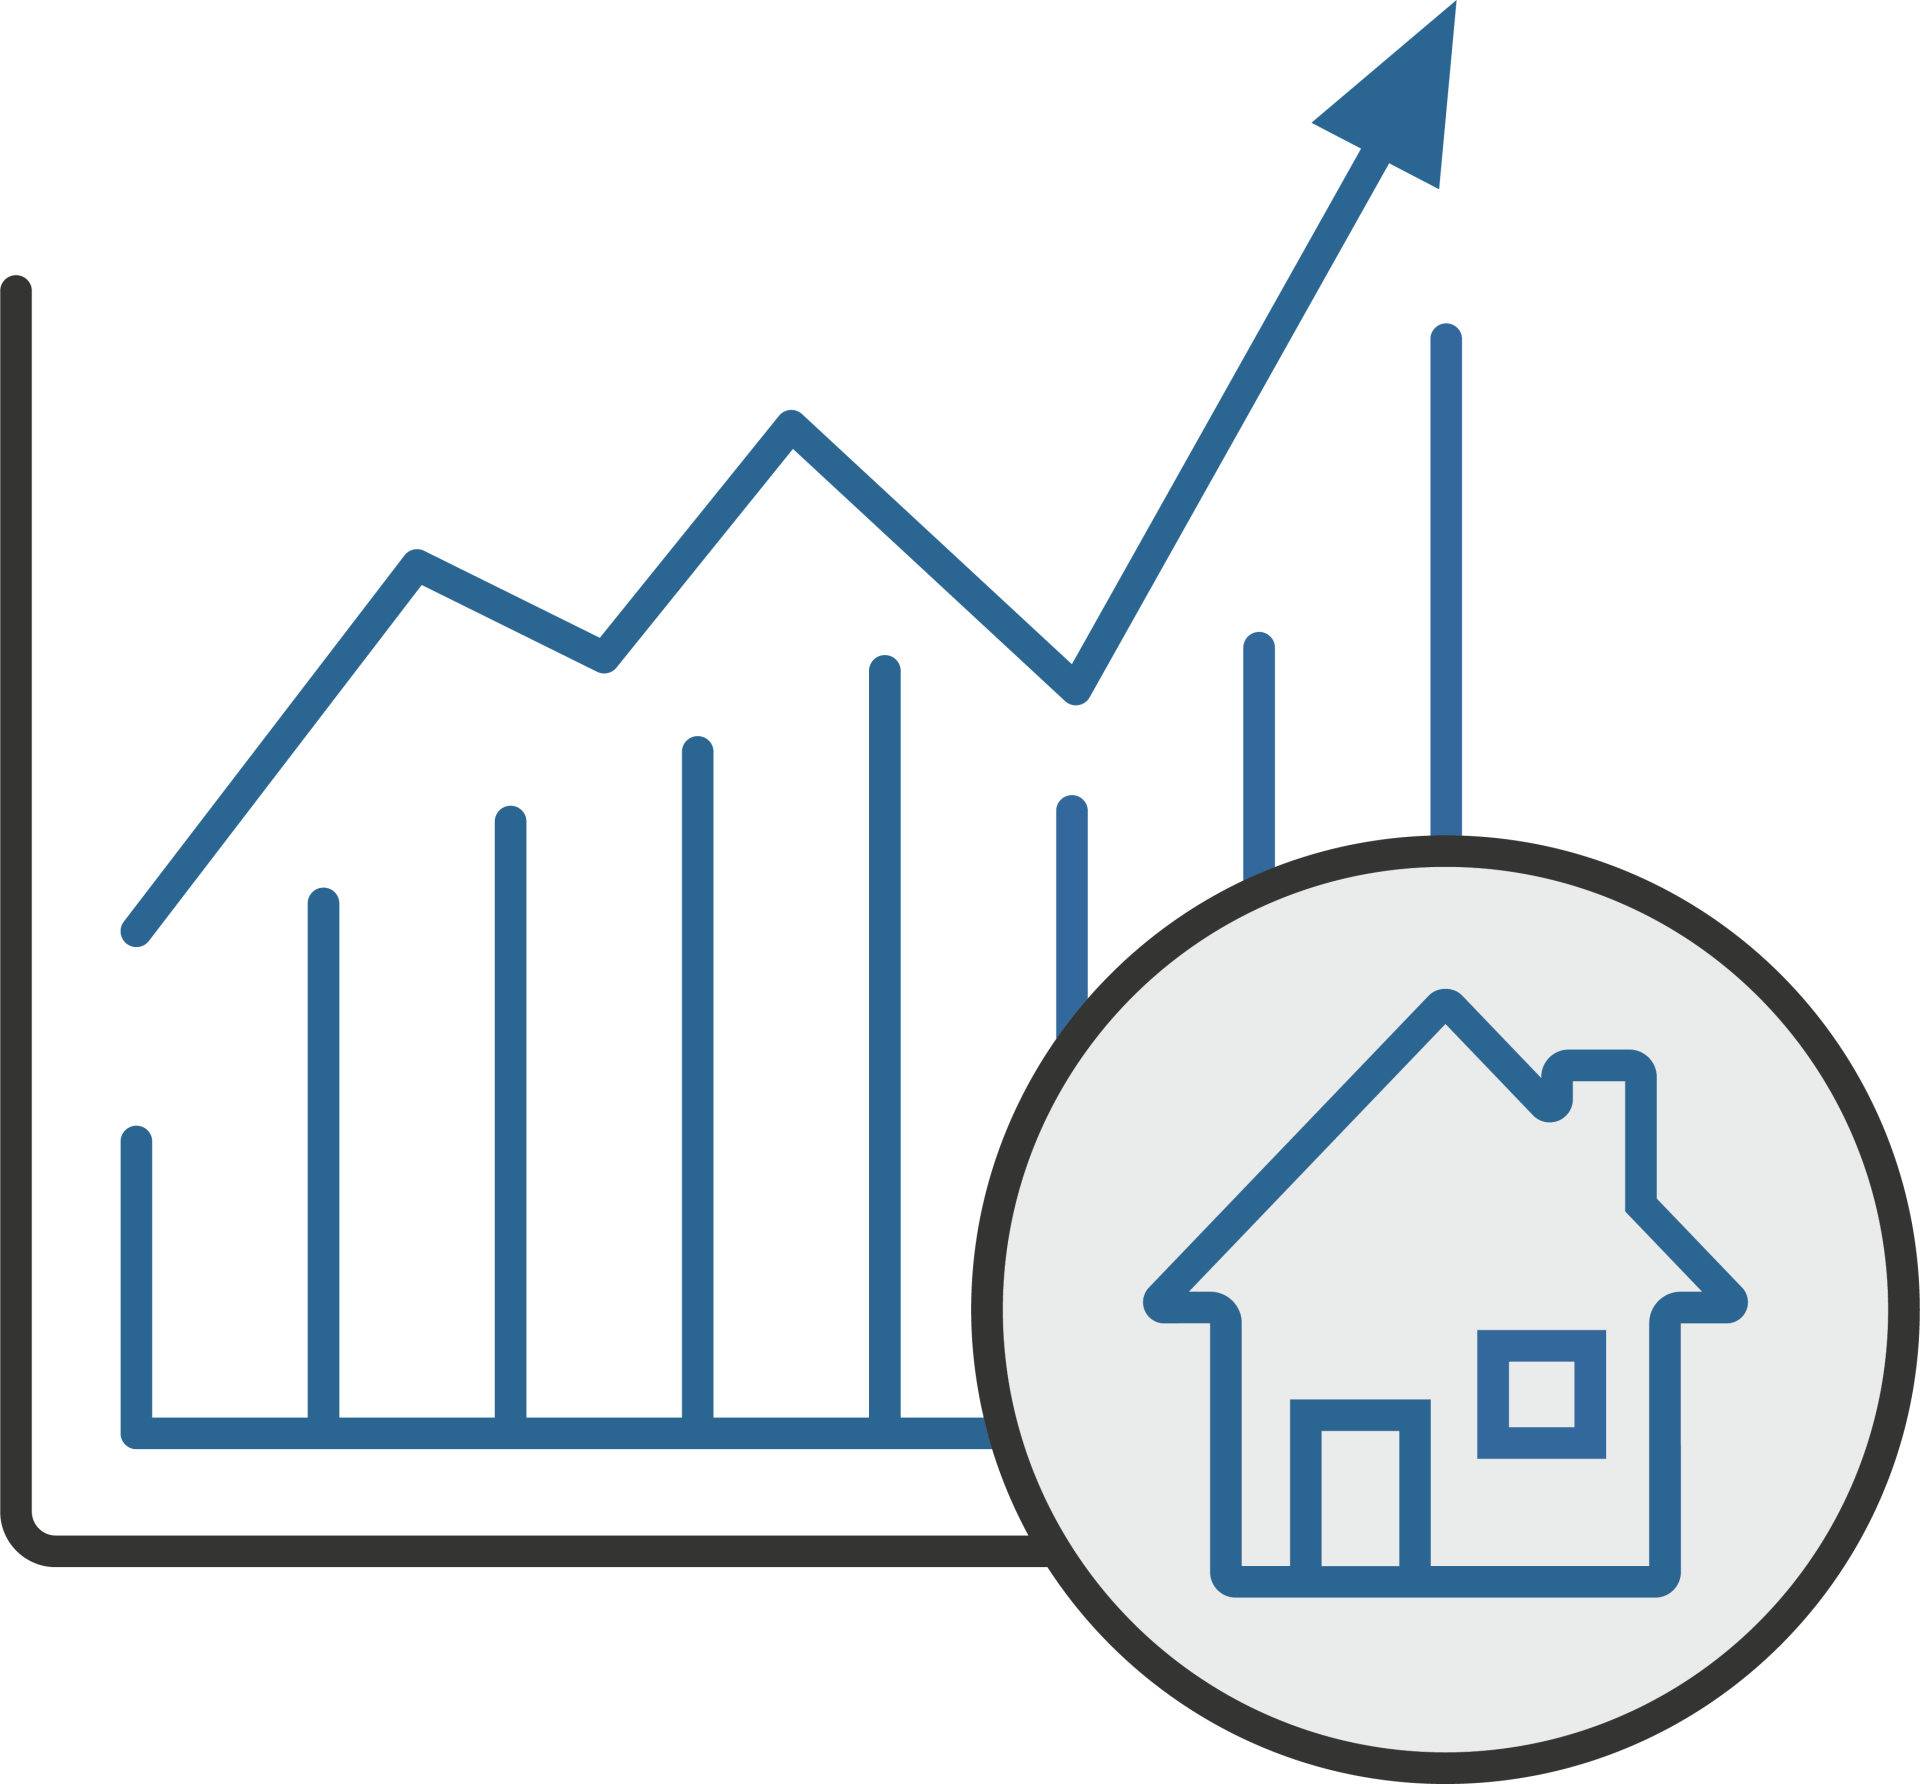 icon of a graphic chart with an arrow going up and a small circle in front with a house icon inside it